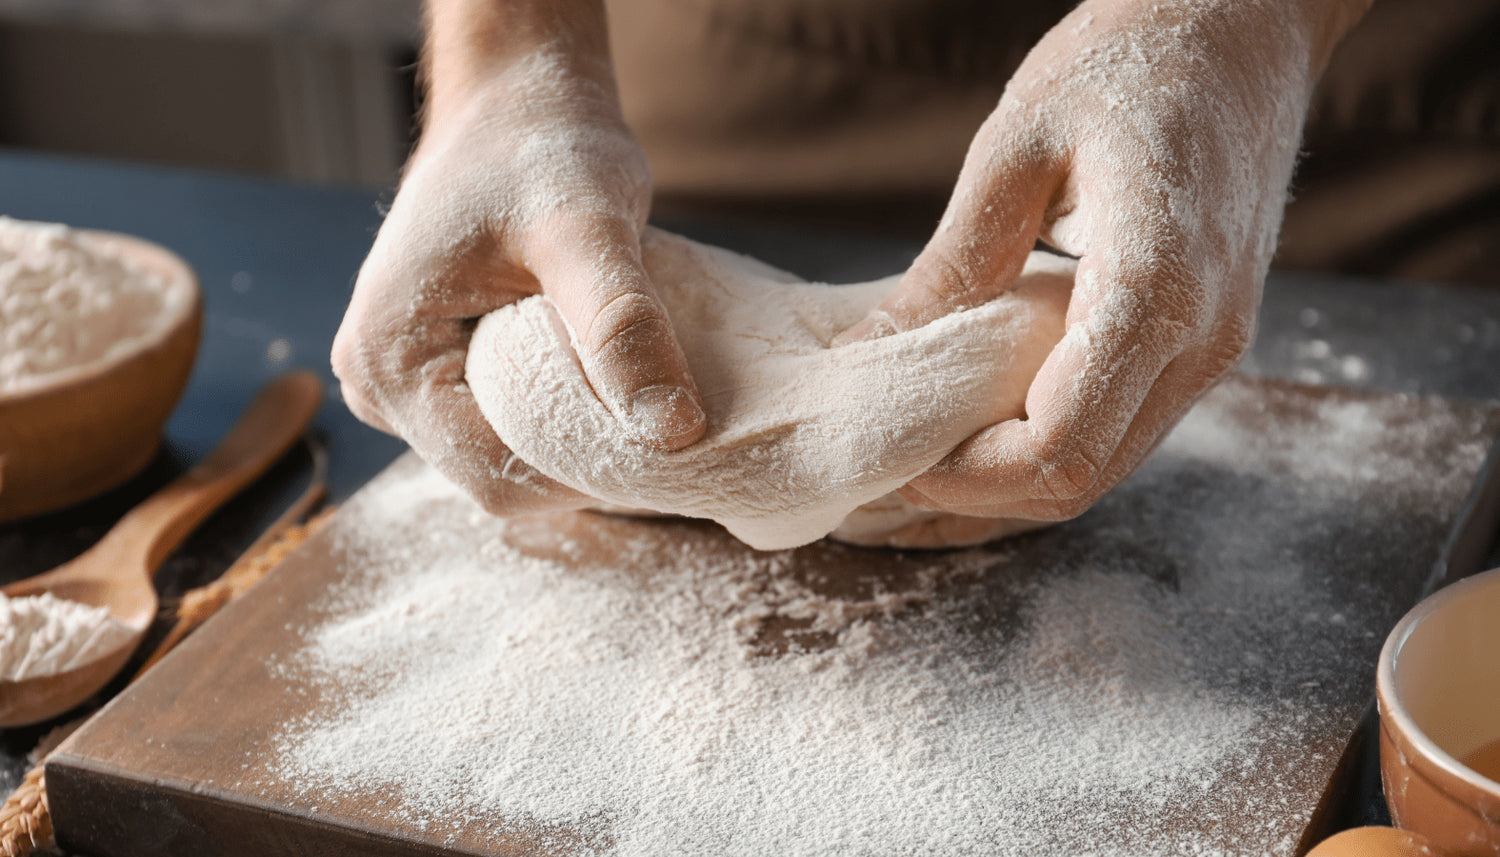 Kneading Whole Wheat Dough by hand